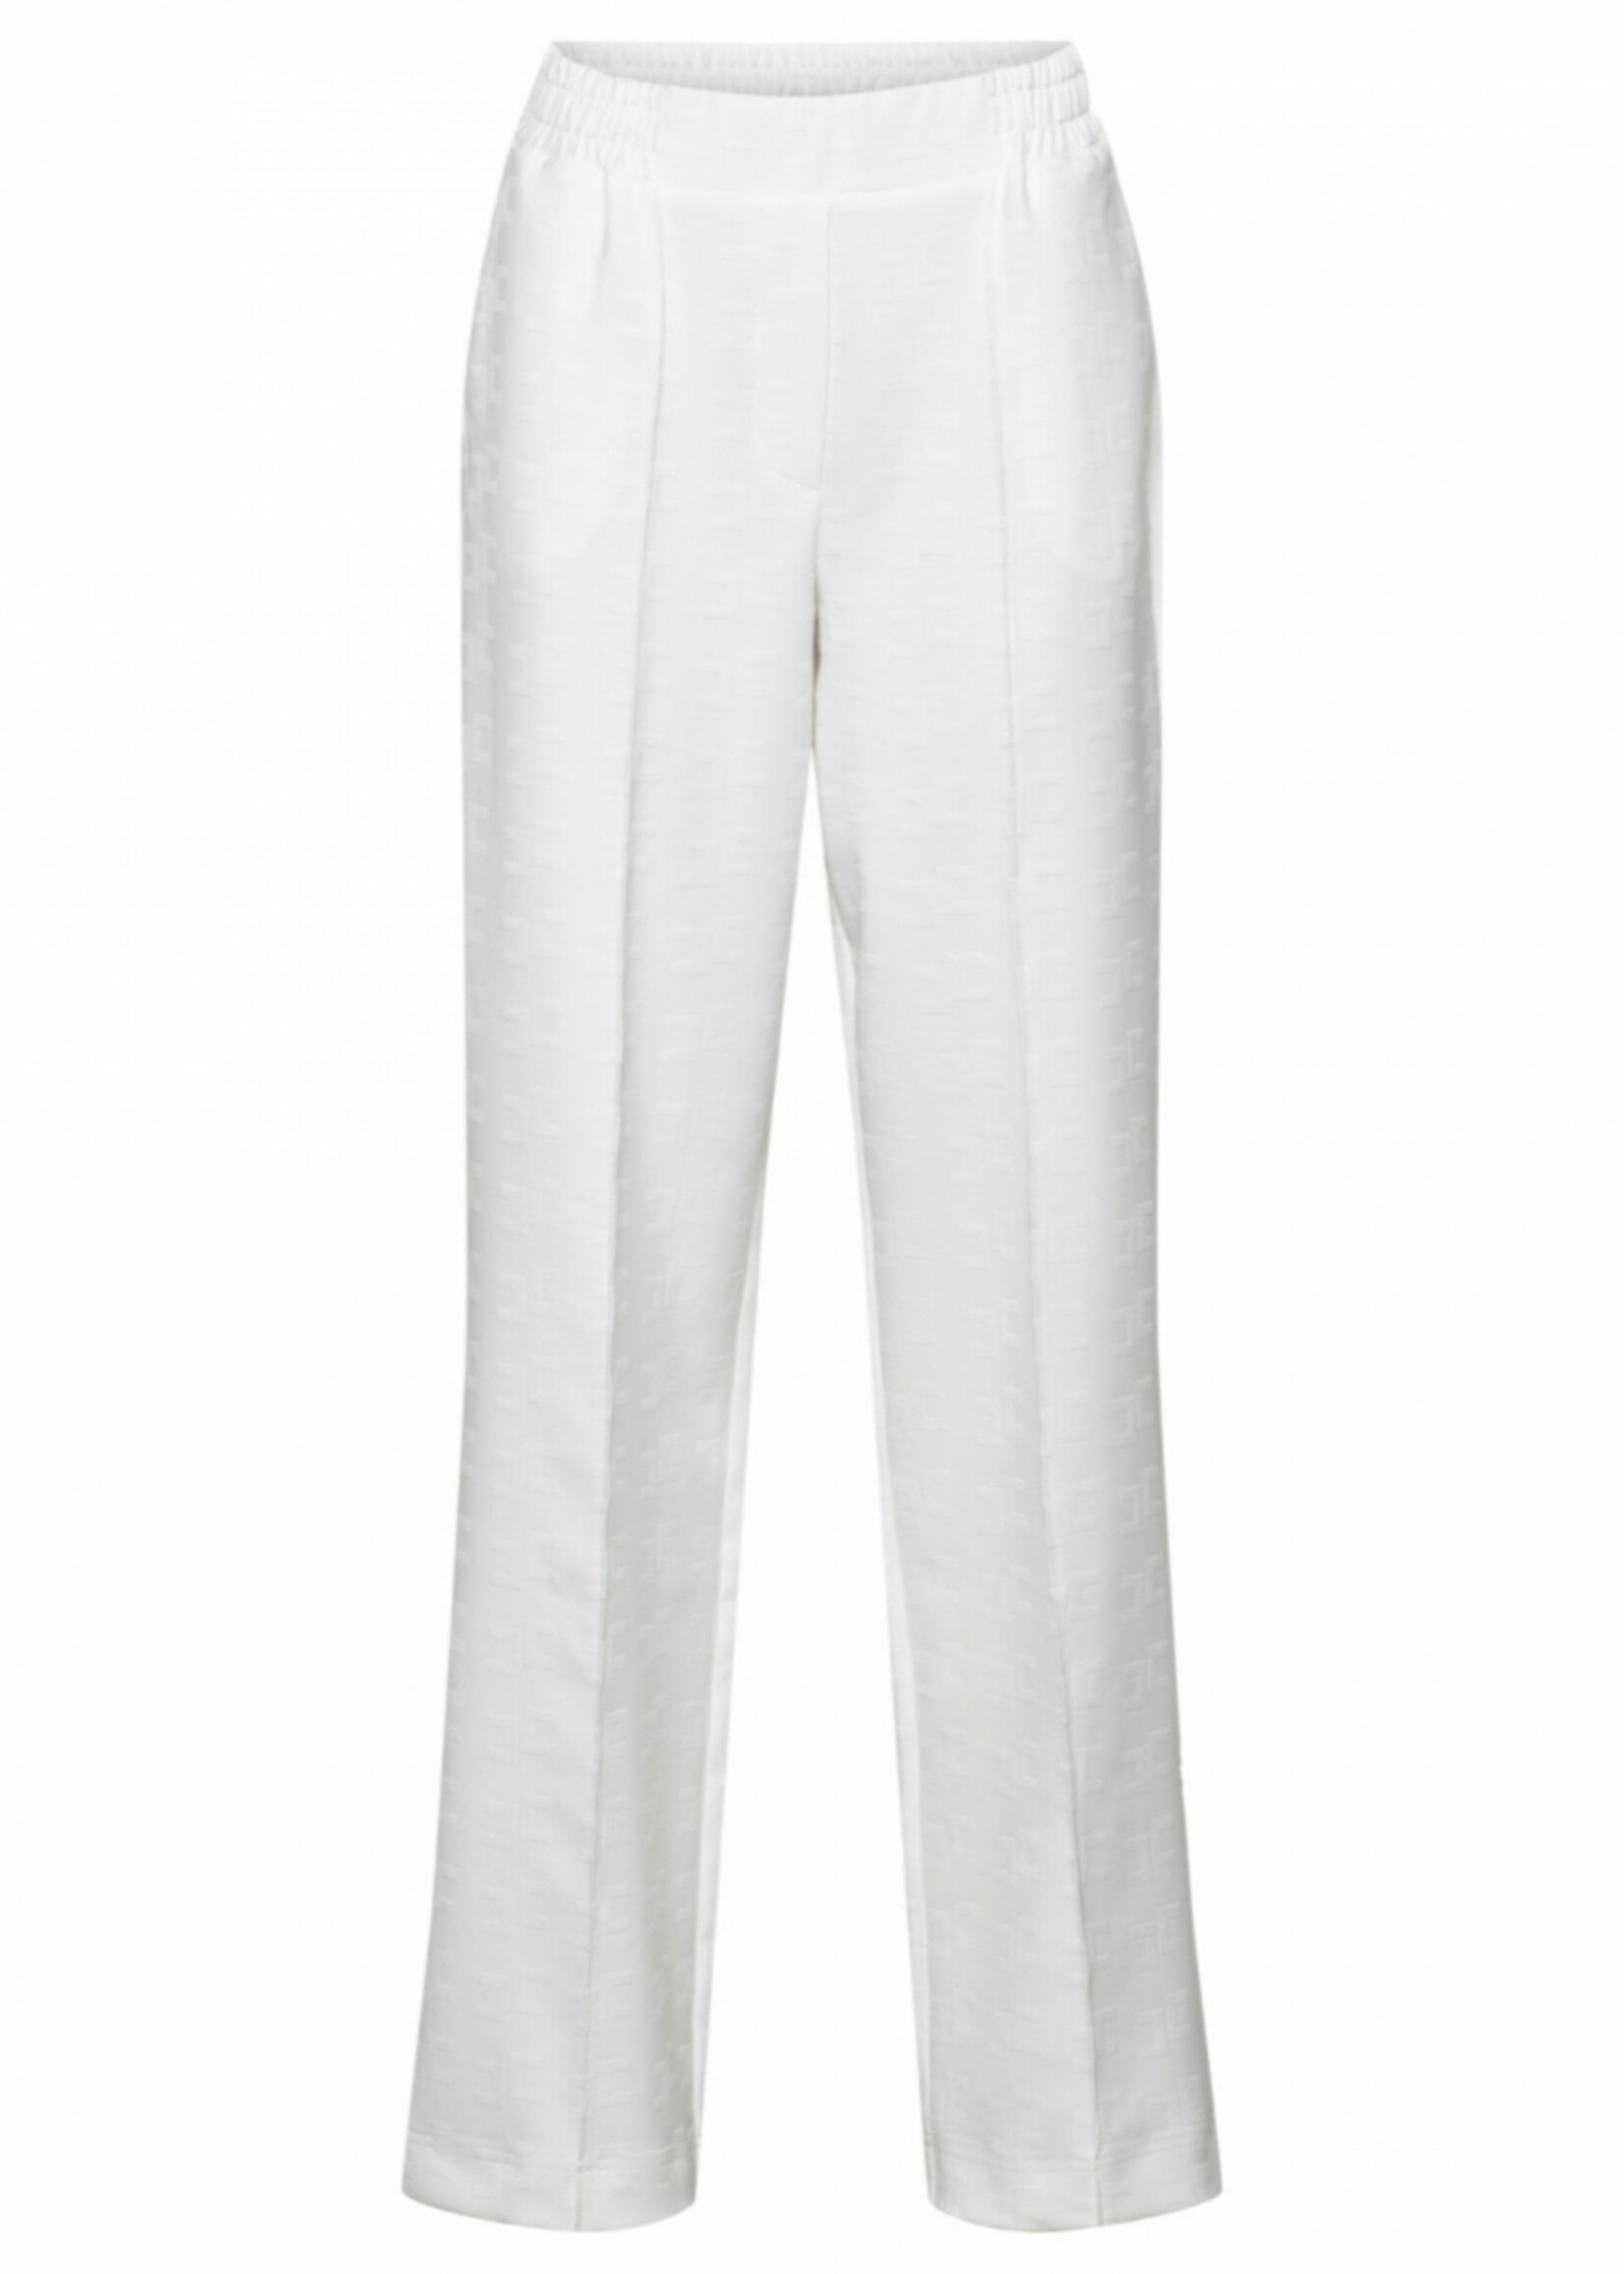 &Co woman Broek chrissy comfort offwhite pa293